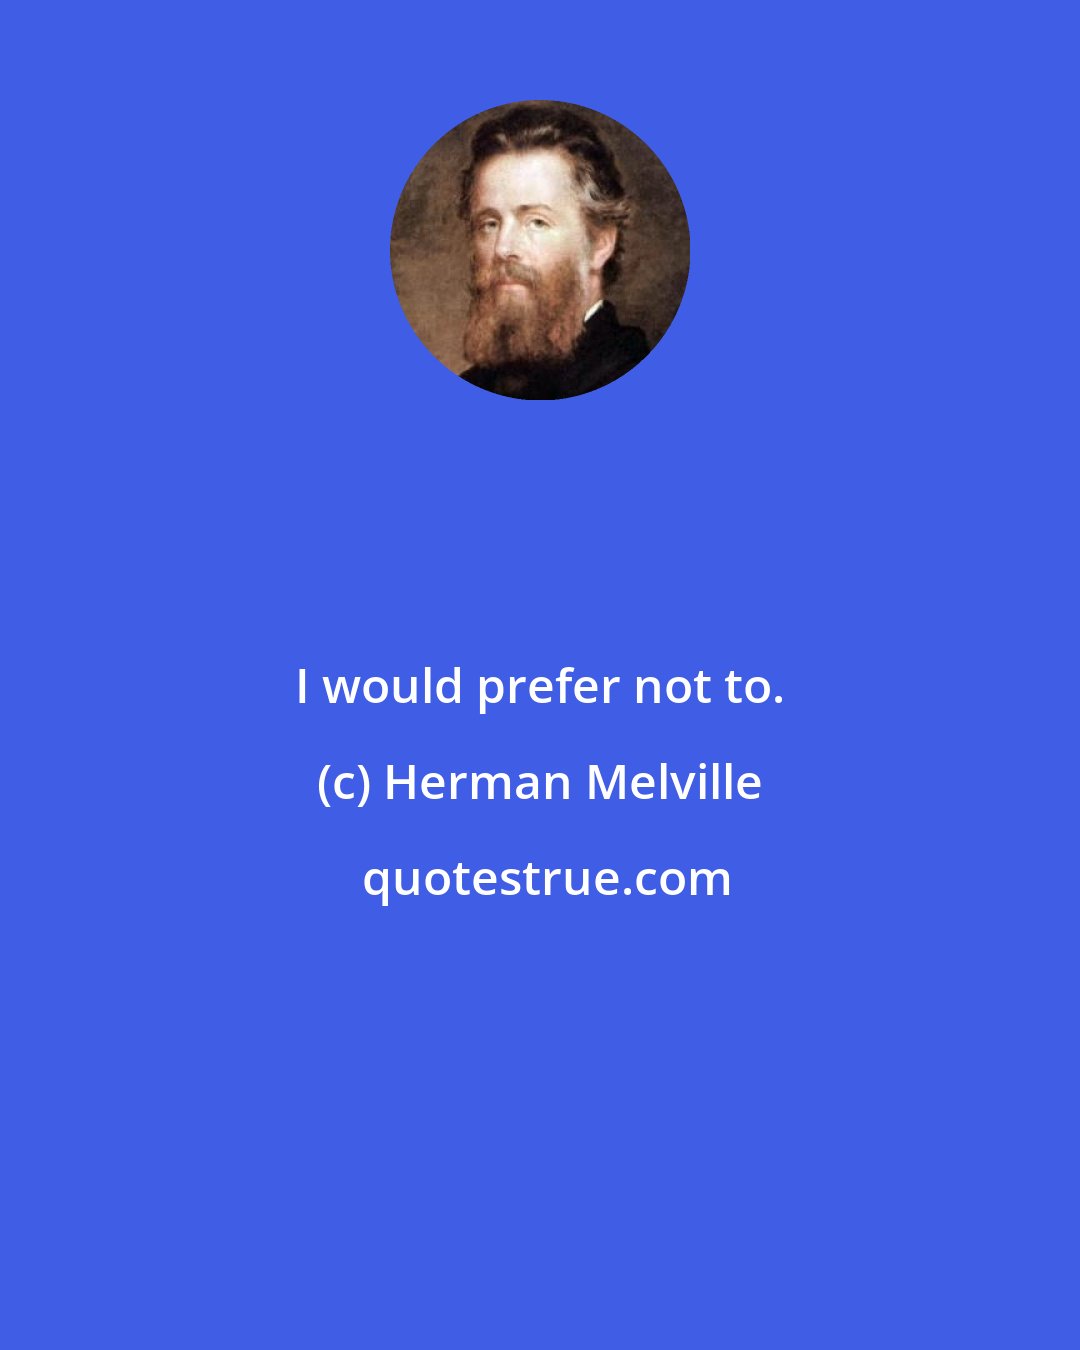 Herman Melville: I would prefer not to.